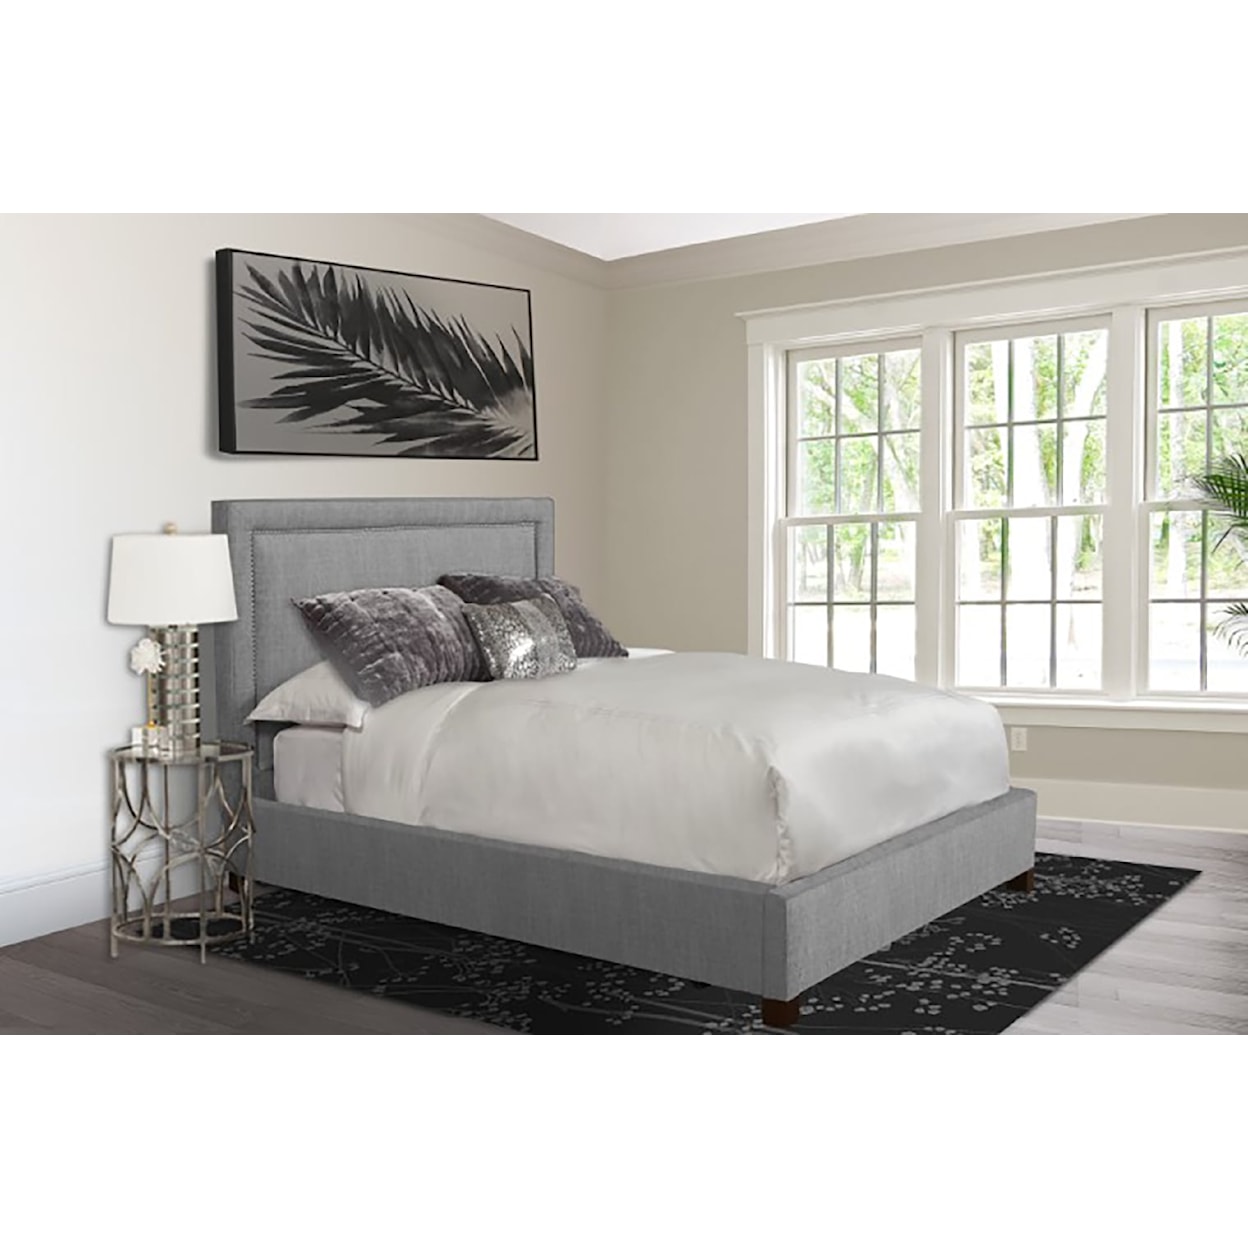 Carolina Living Cody Queen Upholstered Bed